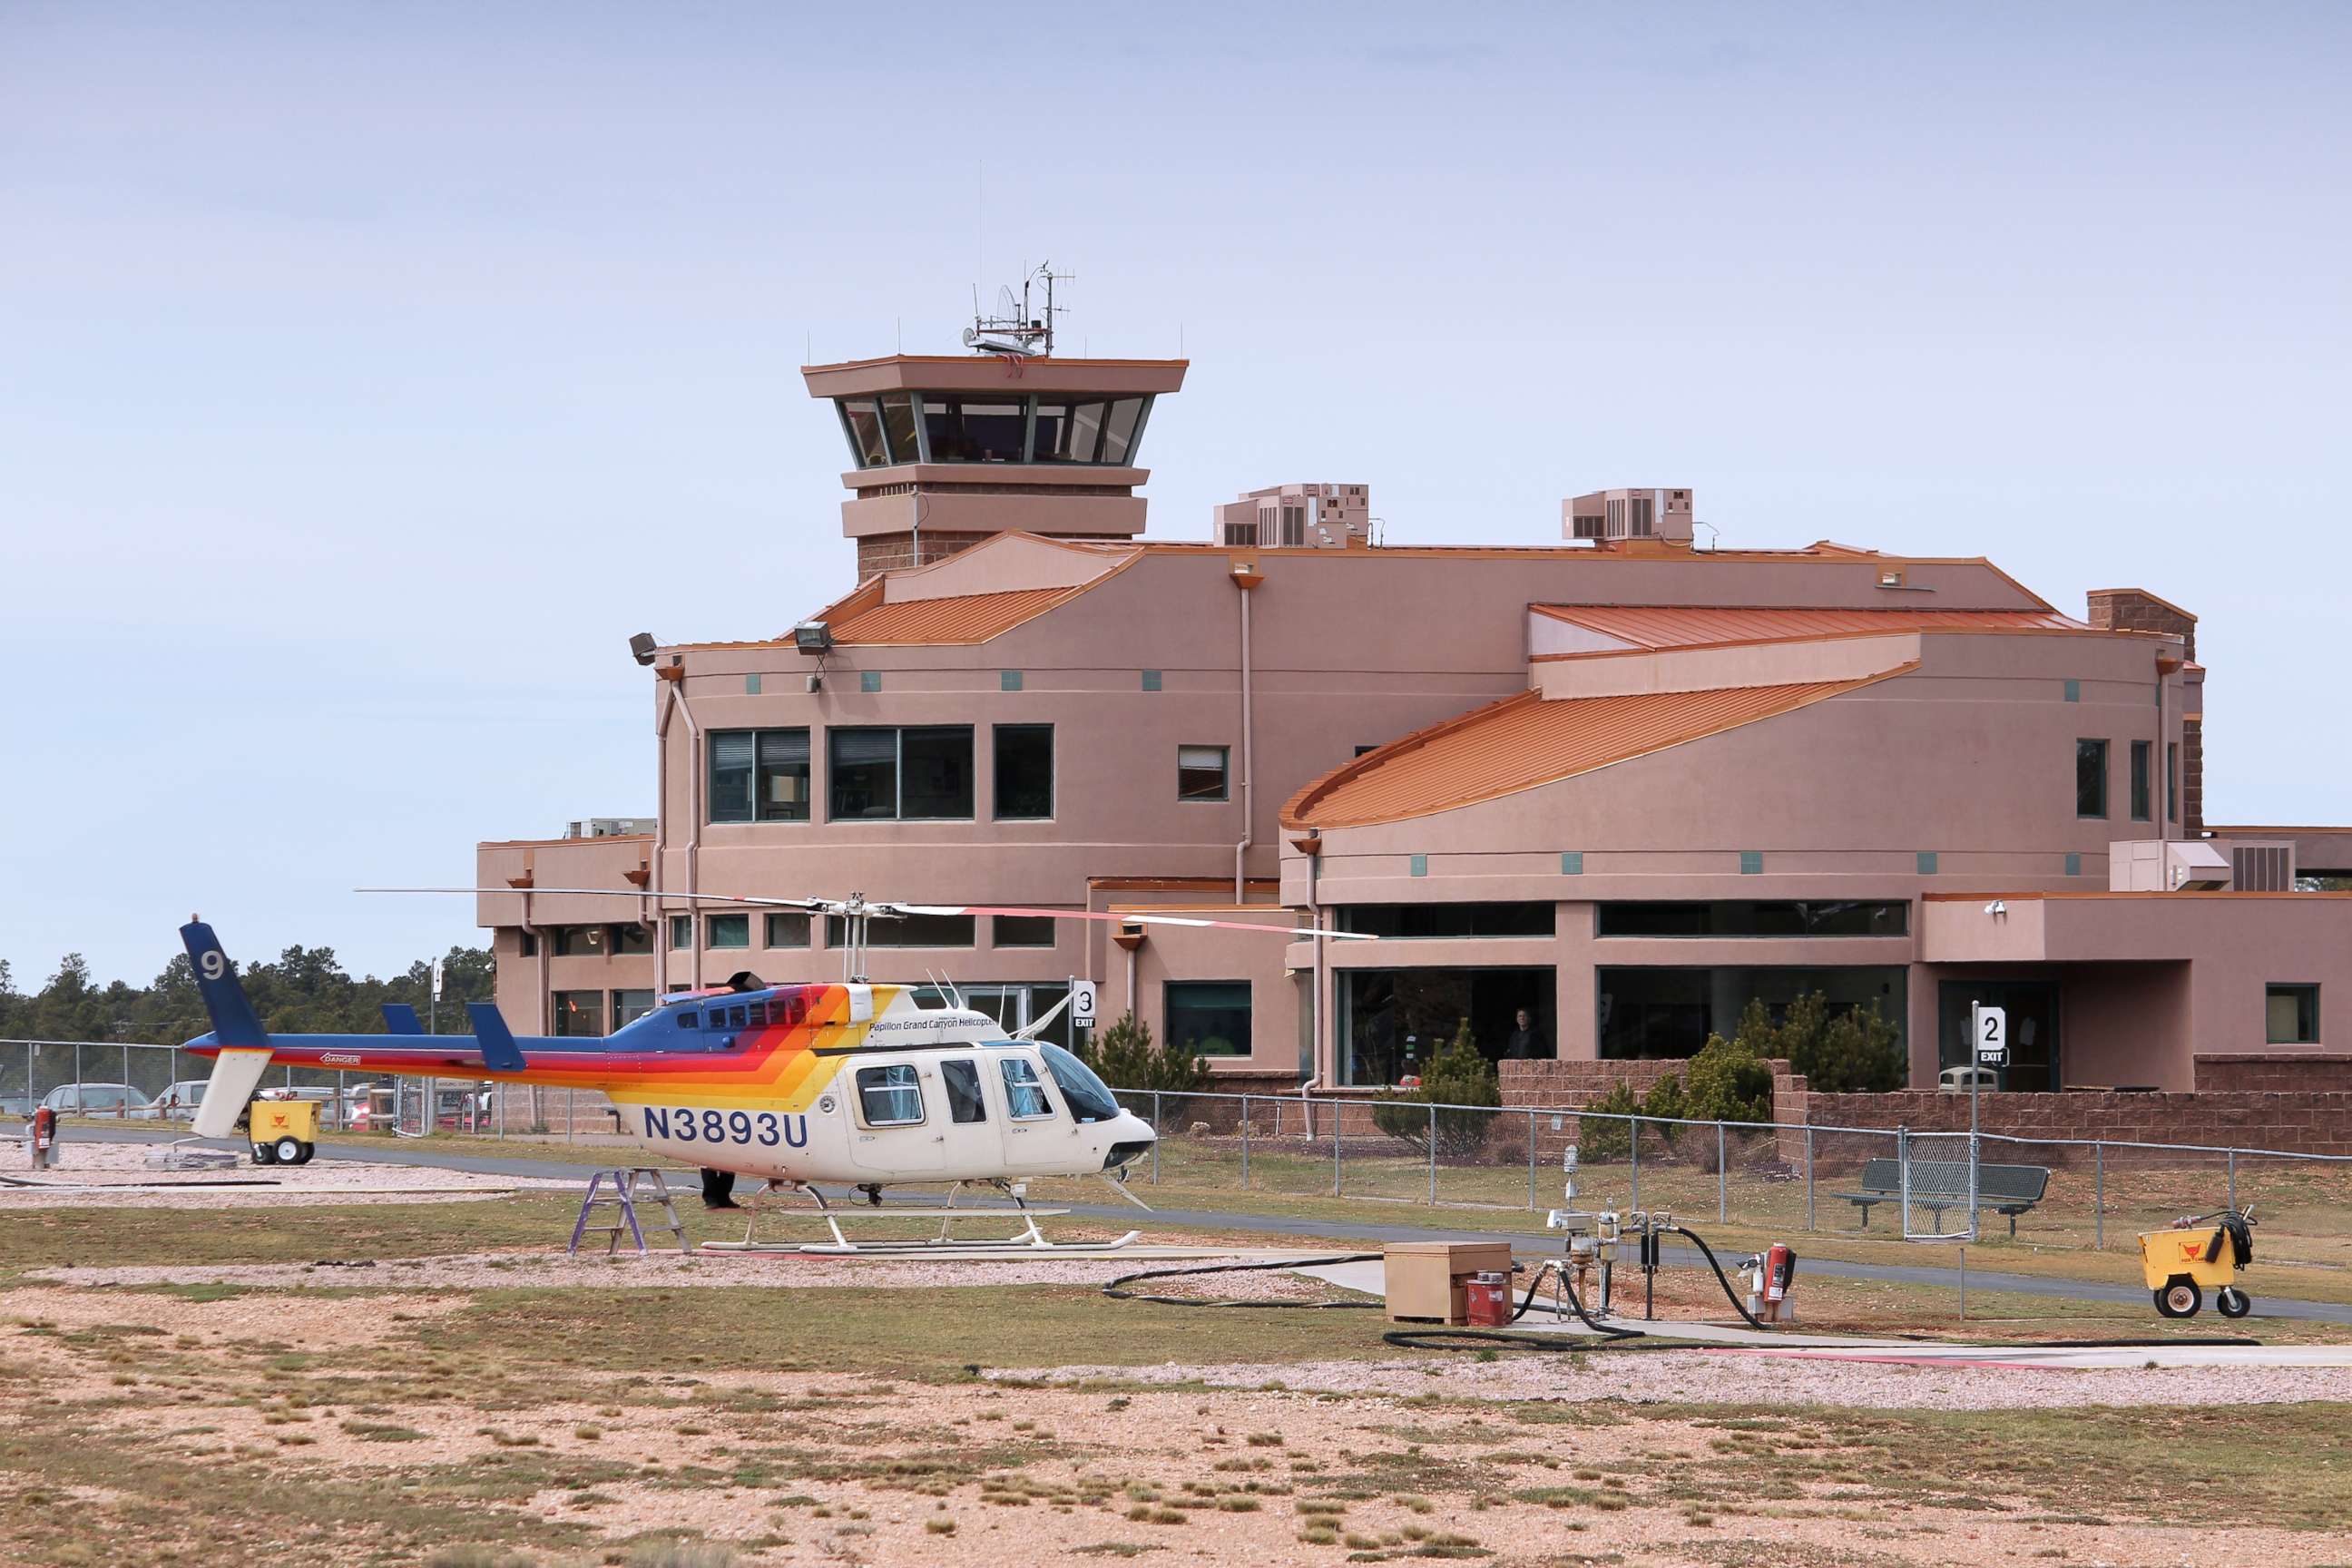 PHOTO: Grand Canyon National Airport is pictured in Arizona, April 3, 2014.